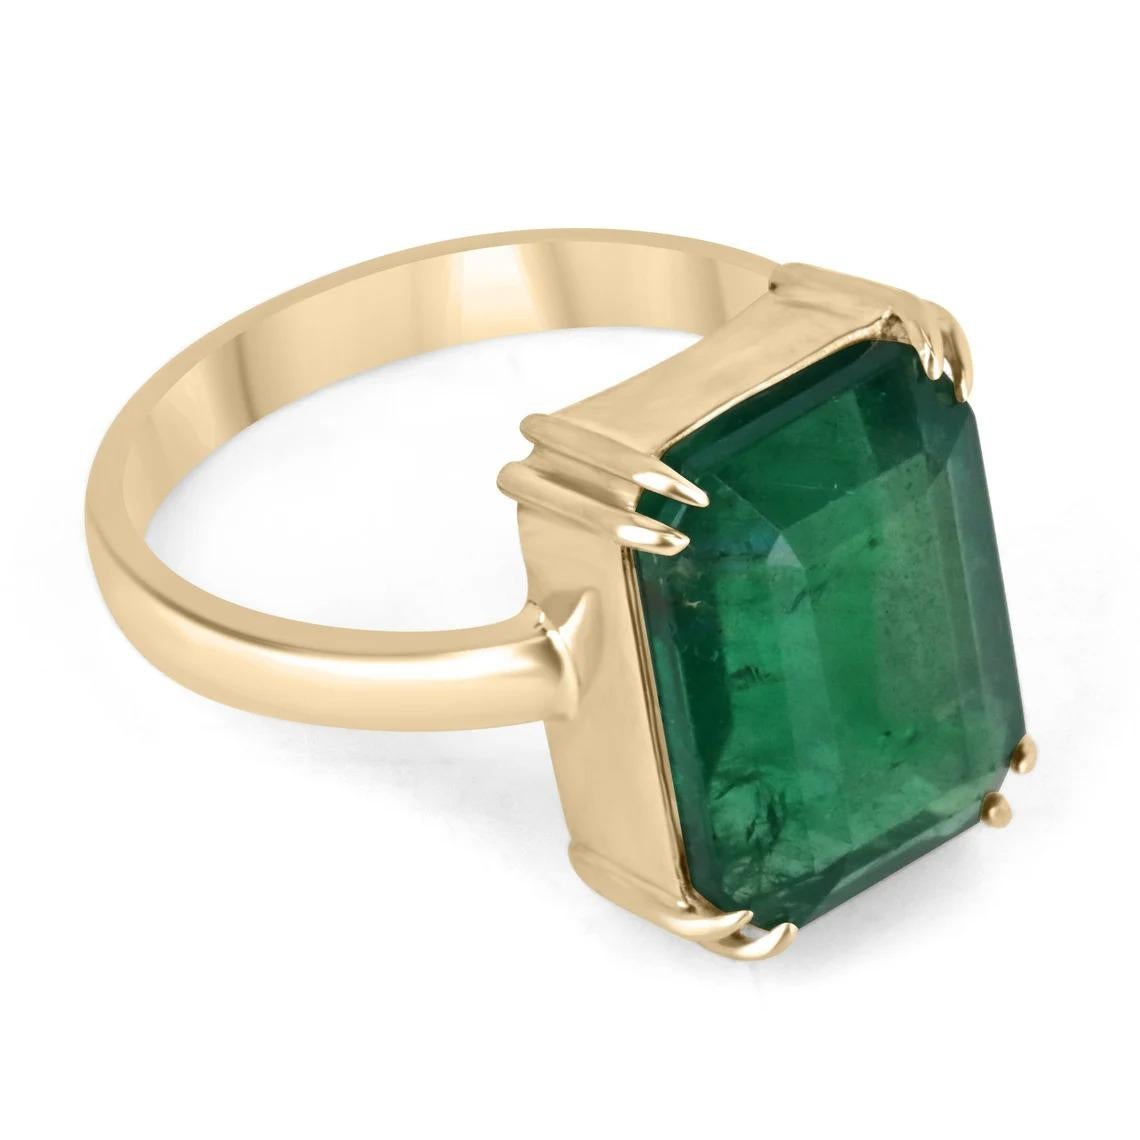 Displayed is a classic emerald solitaire engagement or right-hand ring. This spectacular piece features a remarkable 7.25-carat, natural emerald cut emerald from the origins of Zambia. The center stone showcases a rich green color that enthralls at